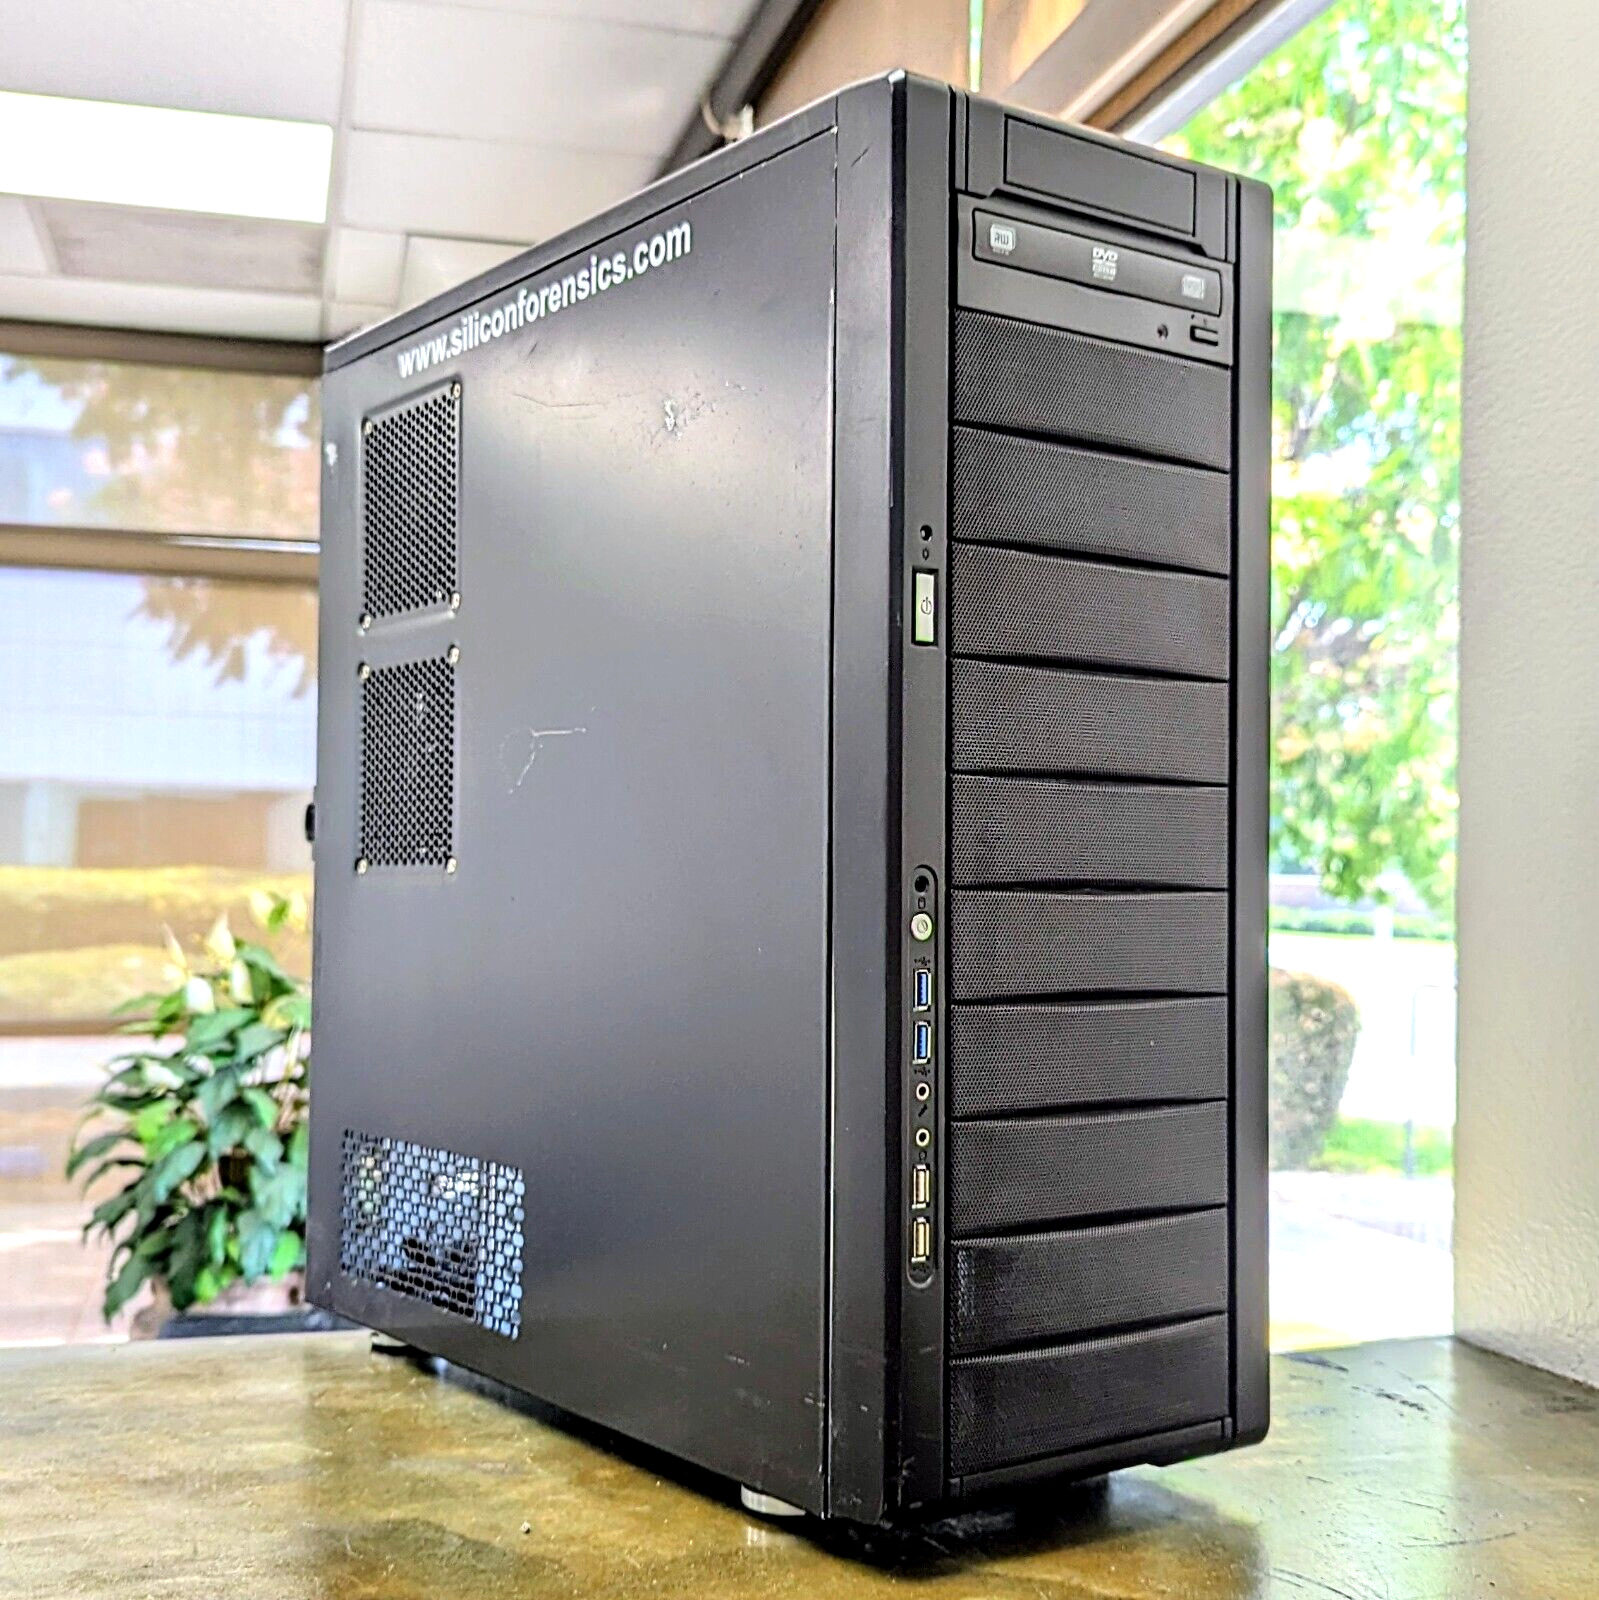 Sharkoon Rebel 12 Value Full ATX Tower BigTower PC/Server Case w/ fans USB 3.0